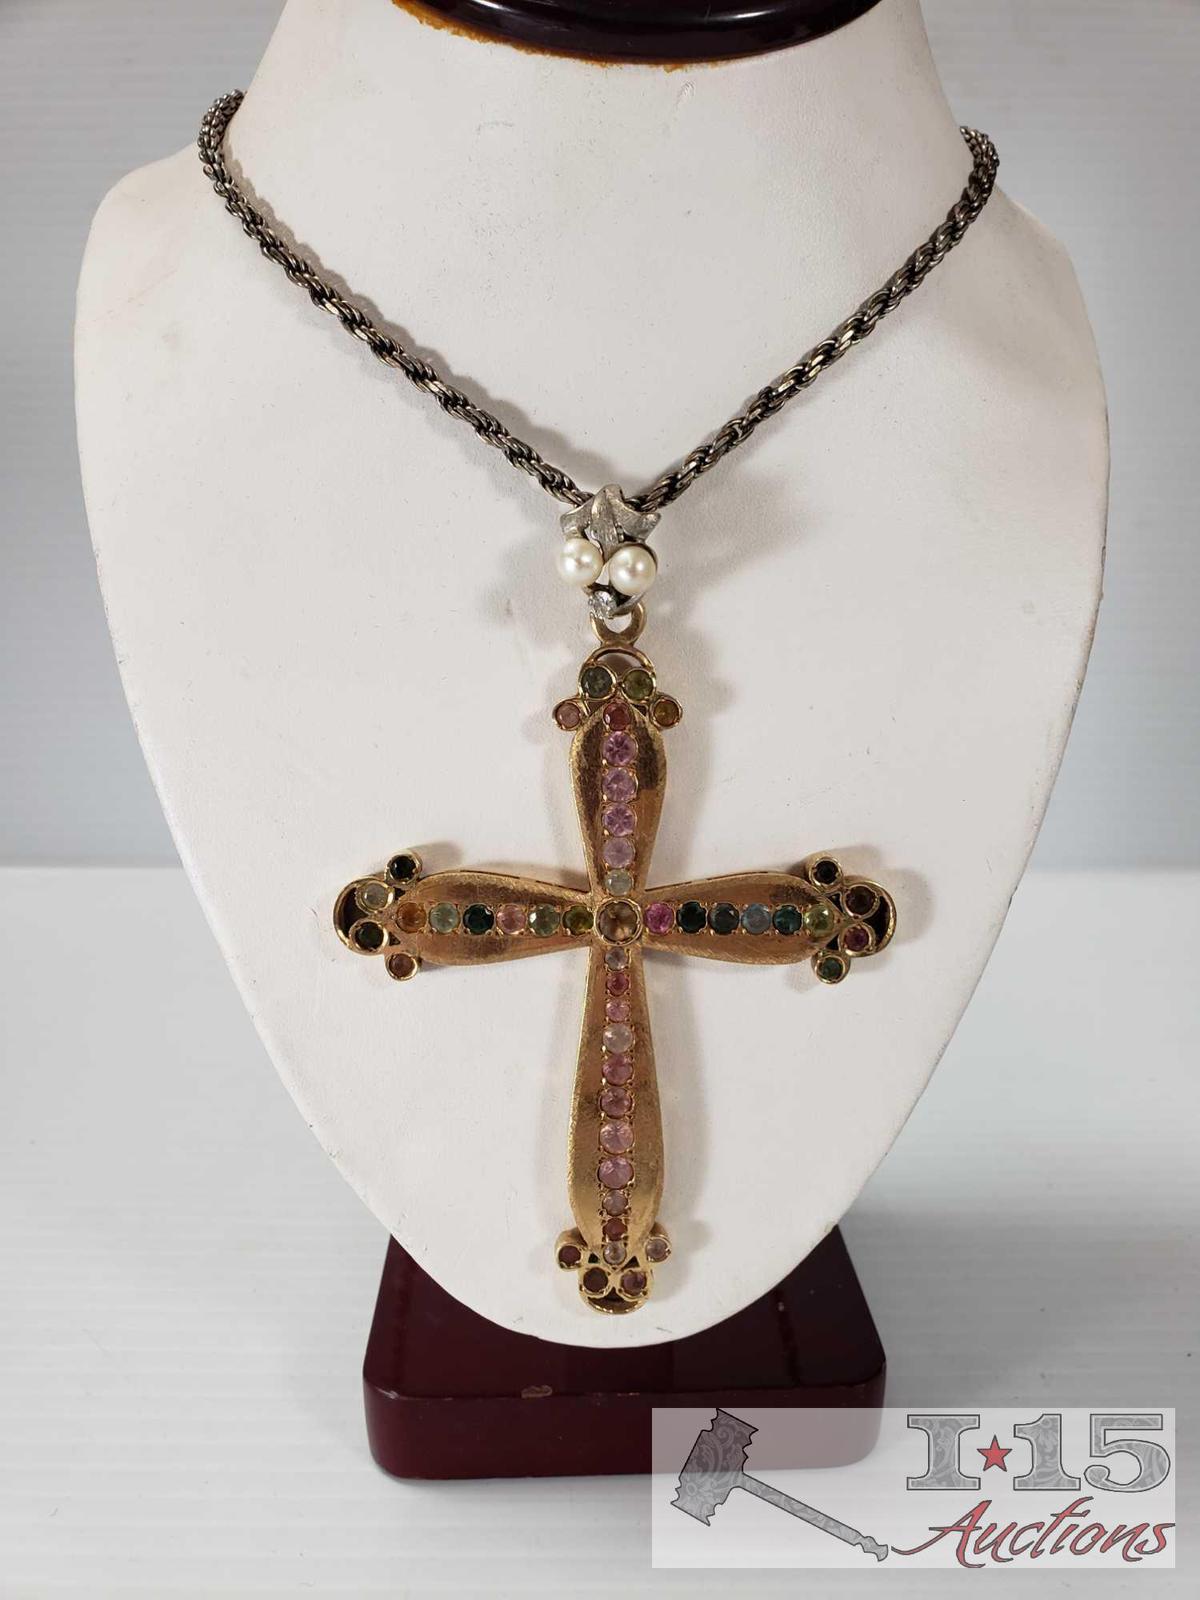 Necklace with 14k Gold Cross Pendant